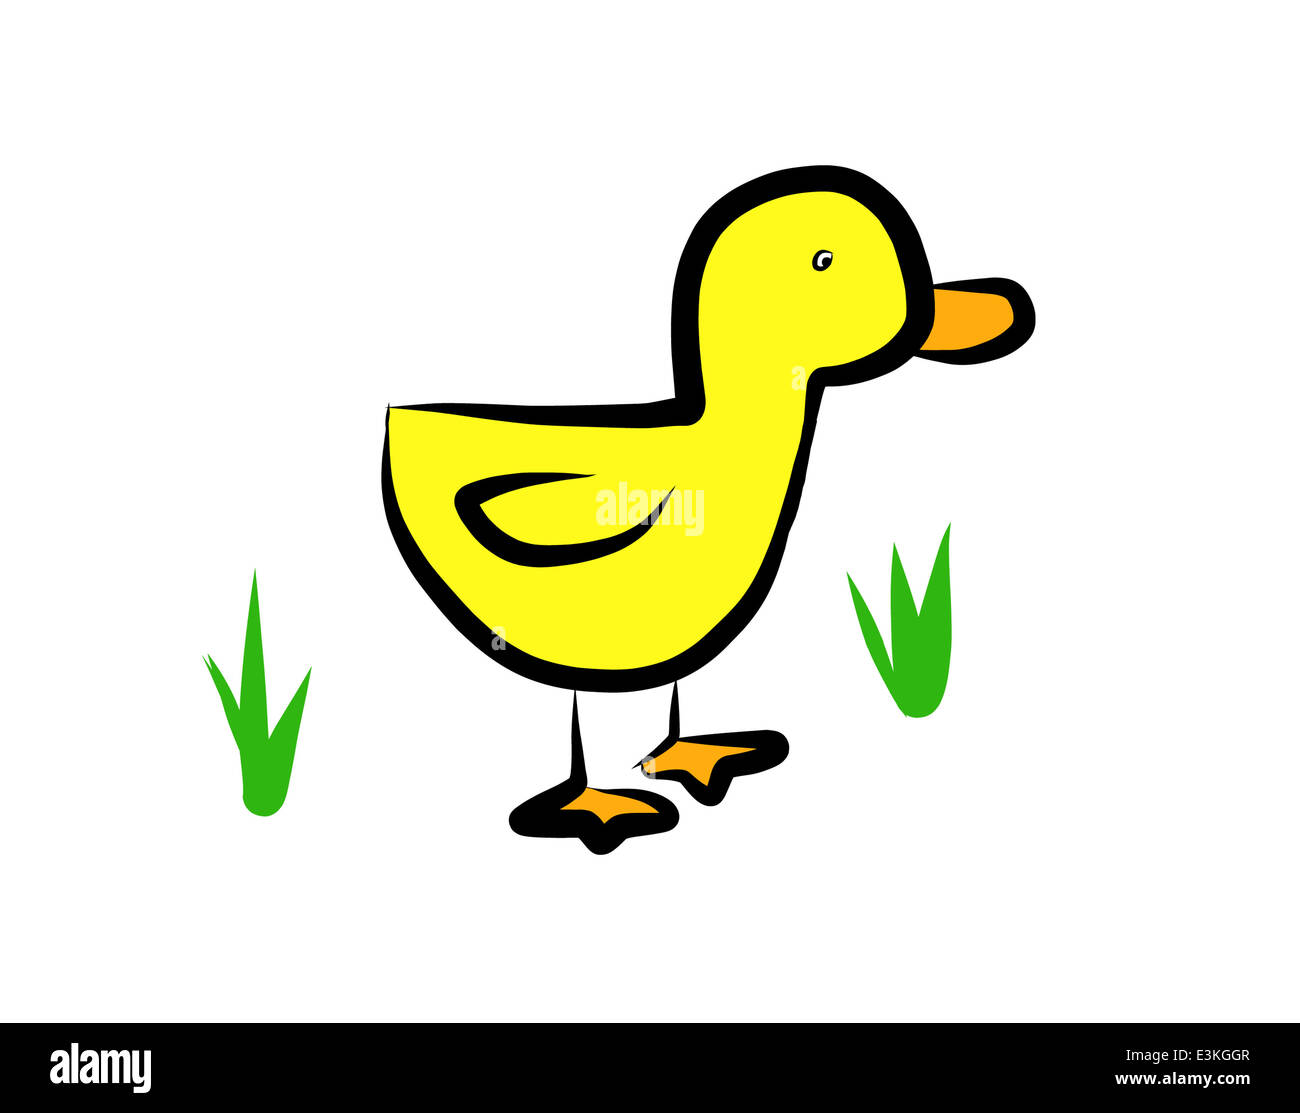 Illustration of a duckling Stock Photo